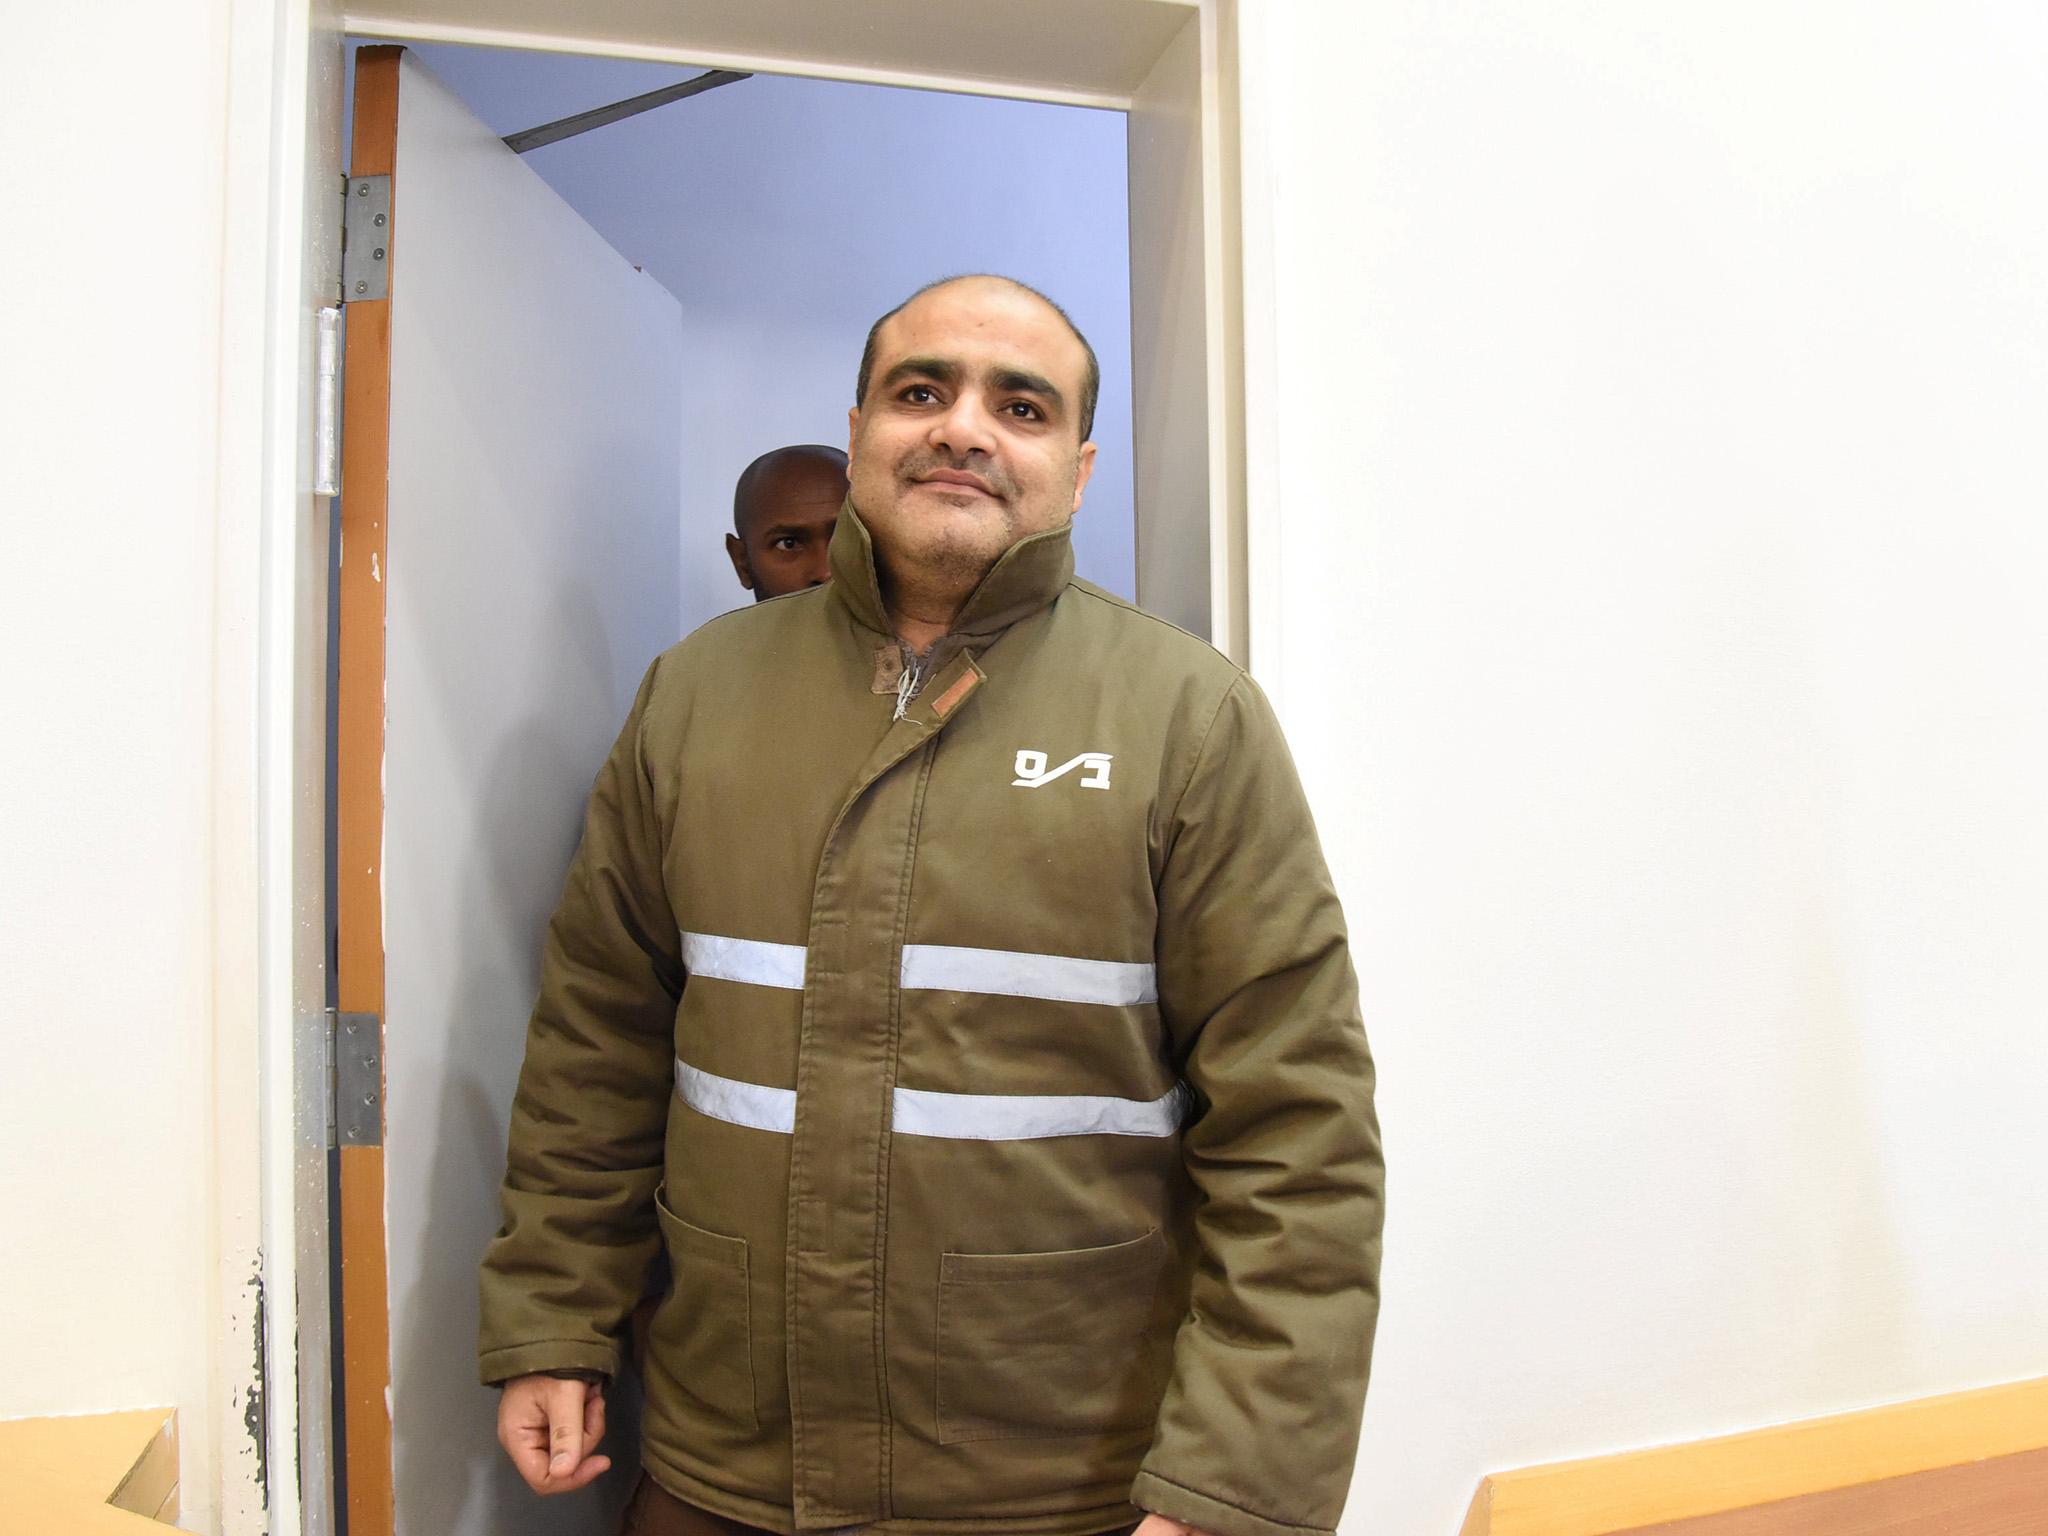 Palestinian Mohammad El Halabi (C), a manager of operations in the Gaza Strip for World Vision